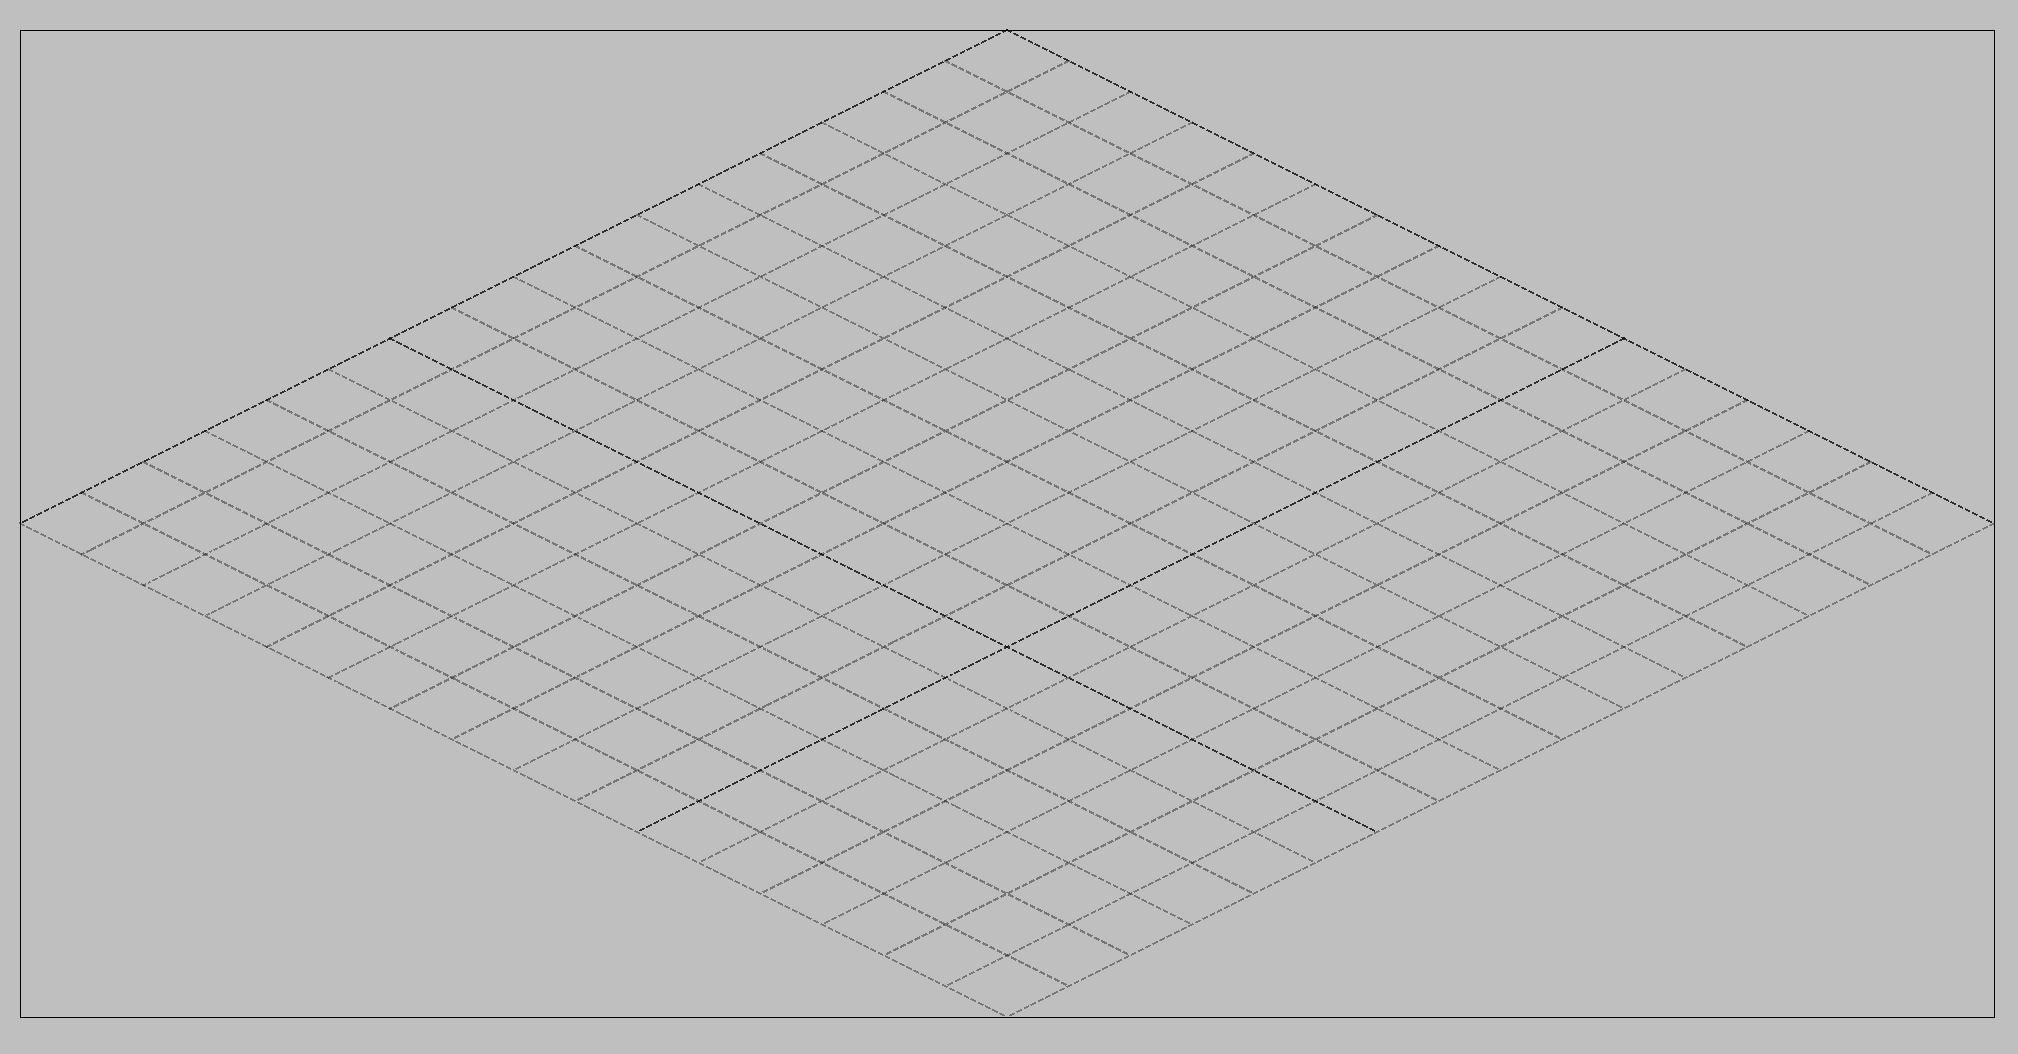 Isometric map generation using Flame, Flutter's game engine